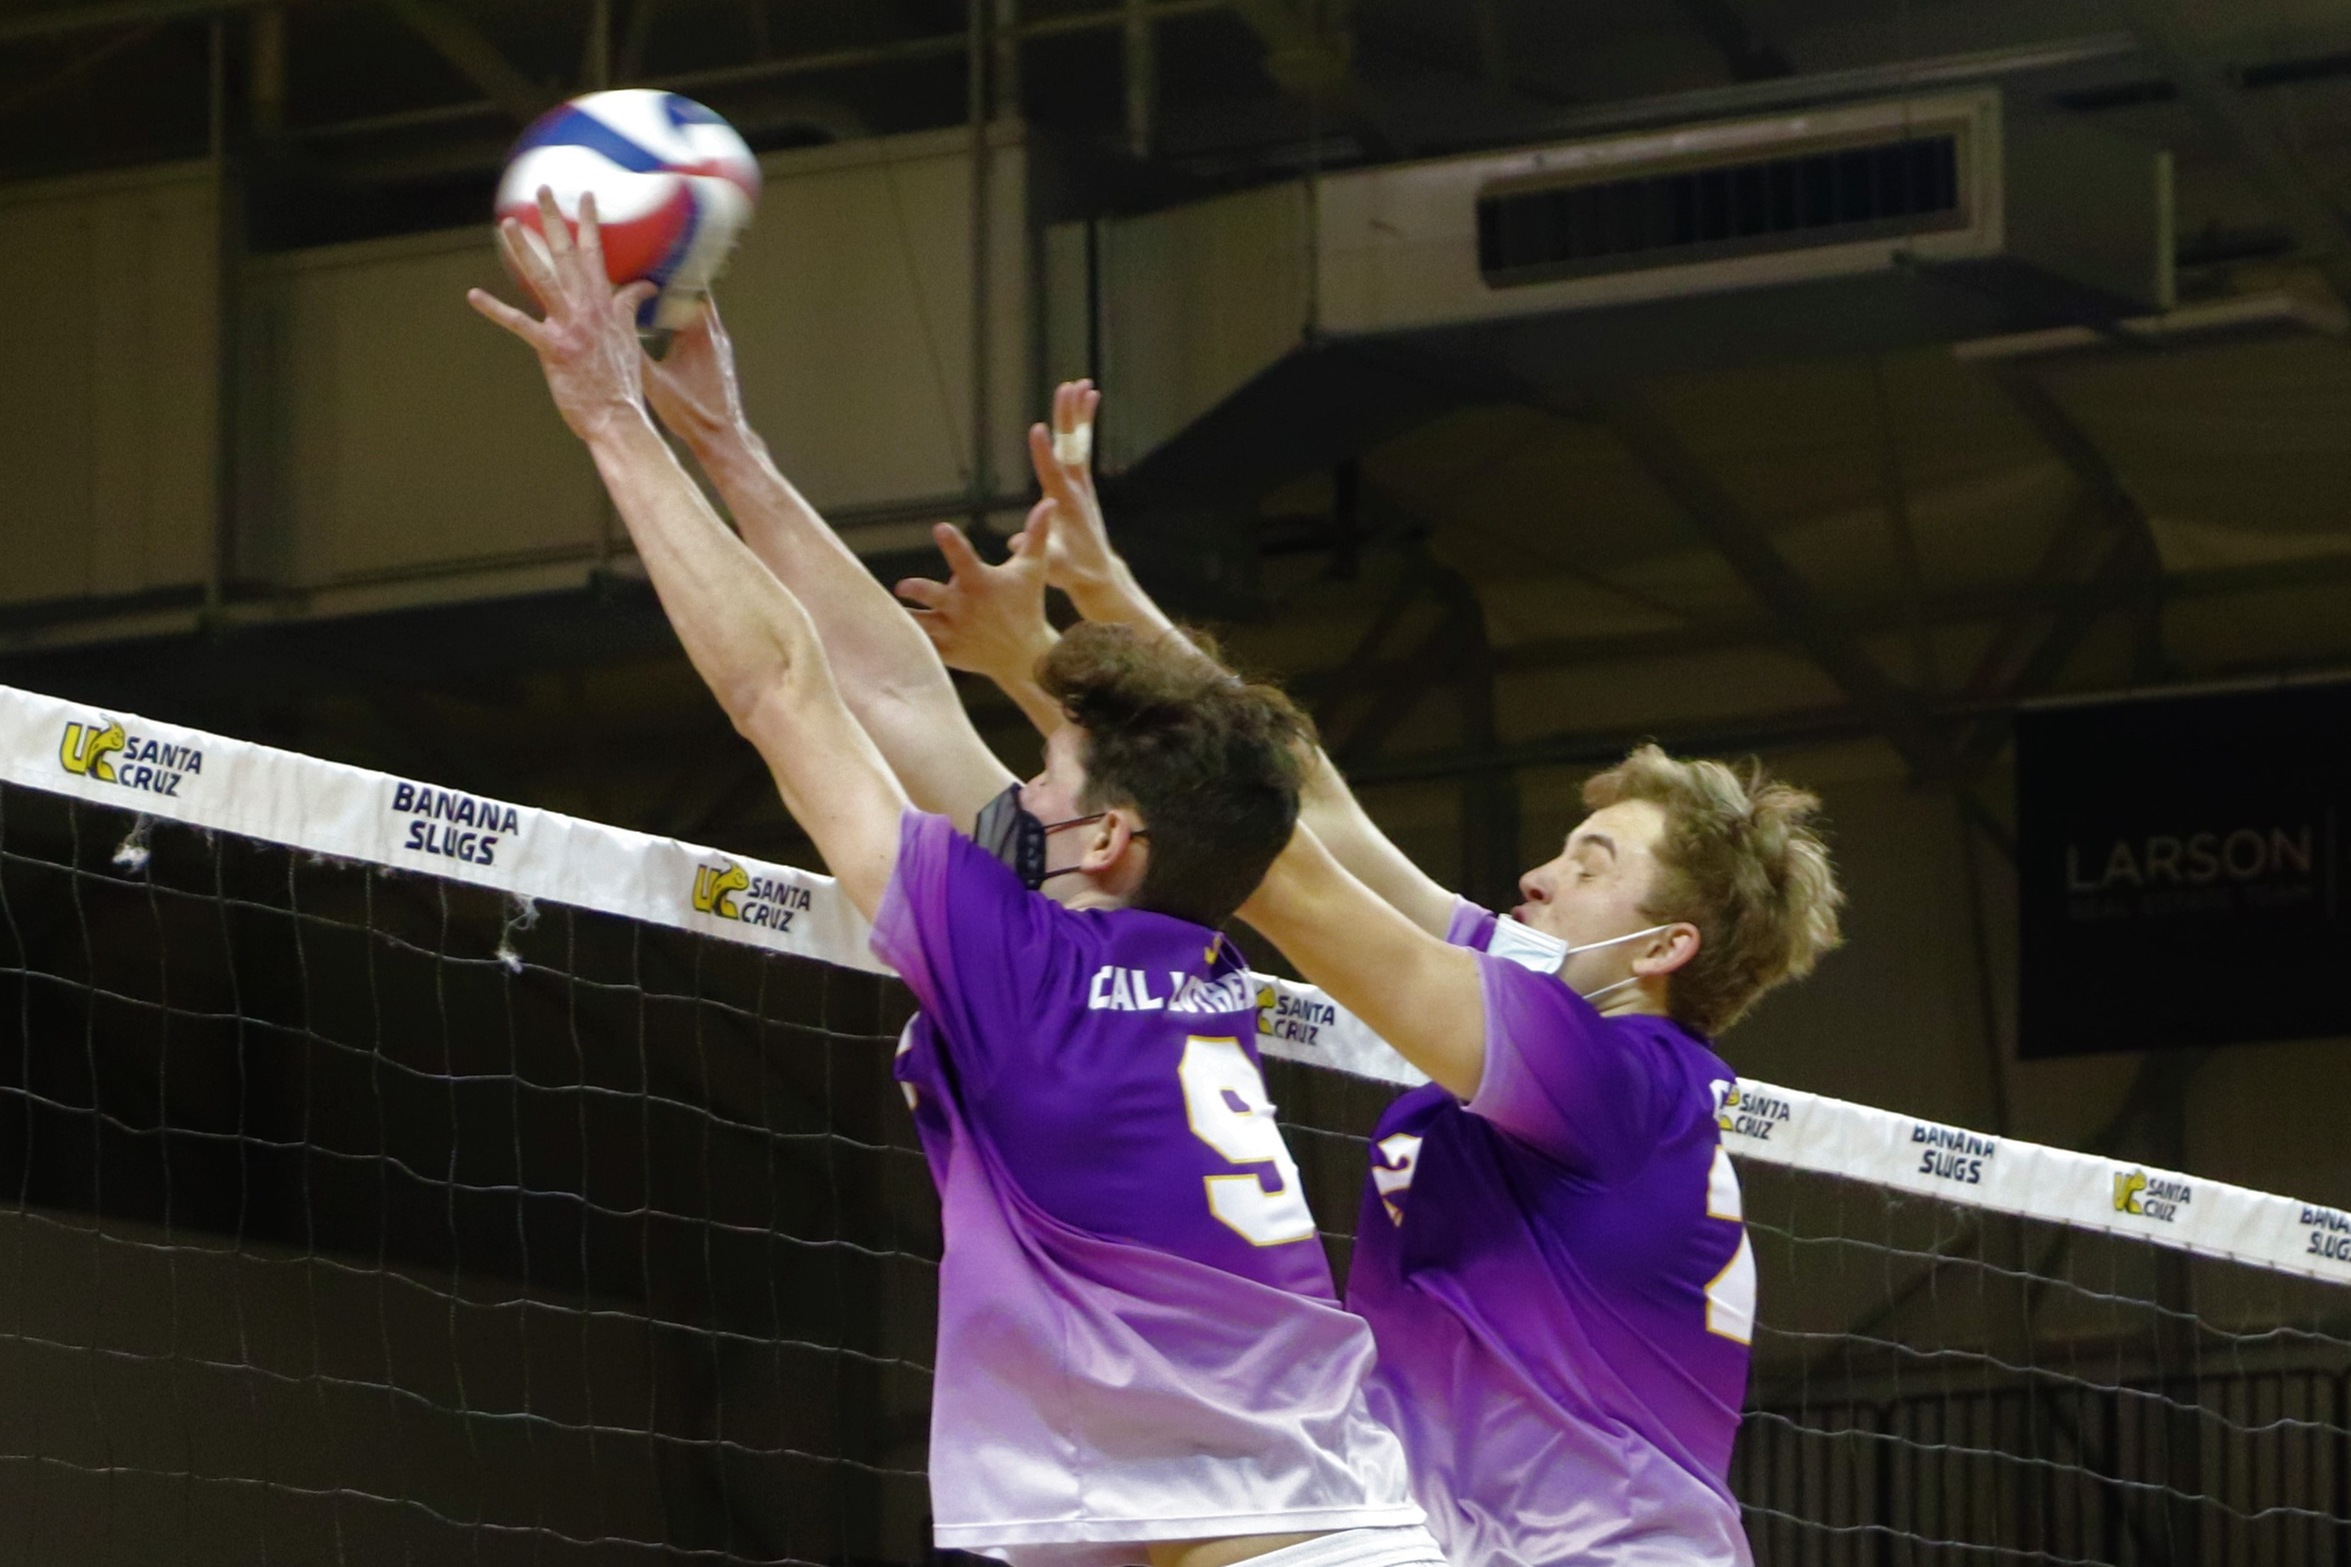 Kingsmen Take First Win Over Santa Cruz in Program History, Play Two 5 Set Matches